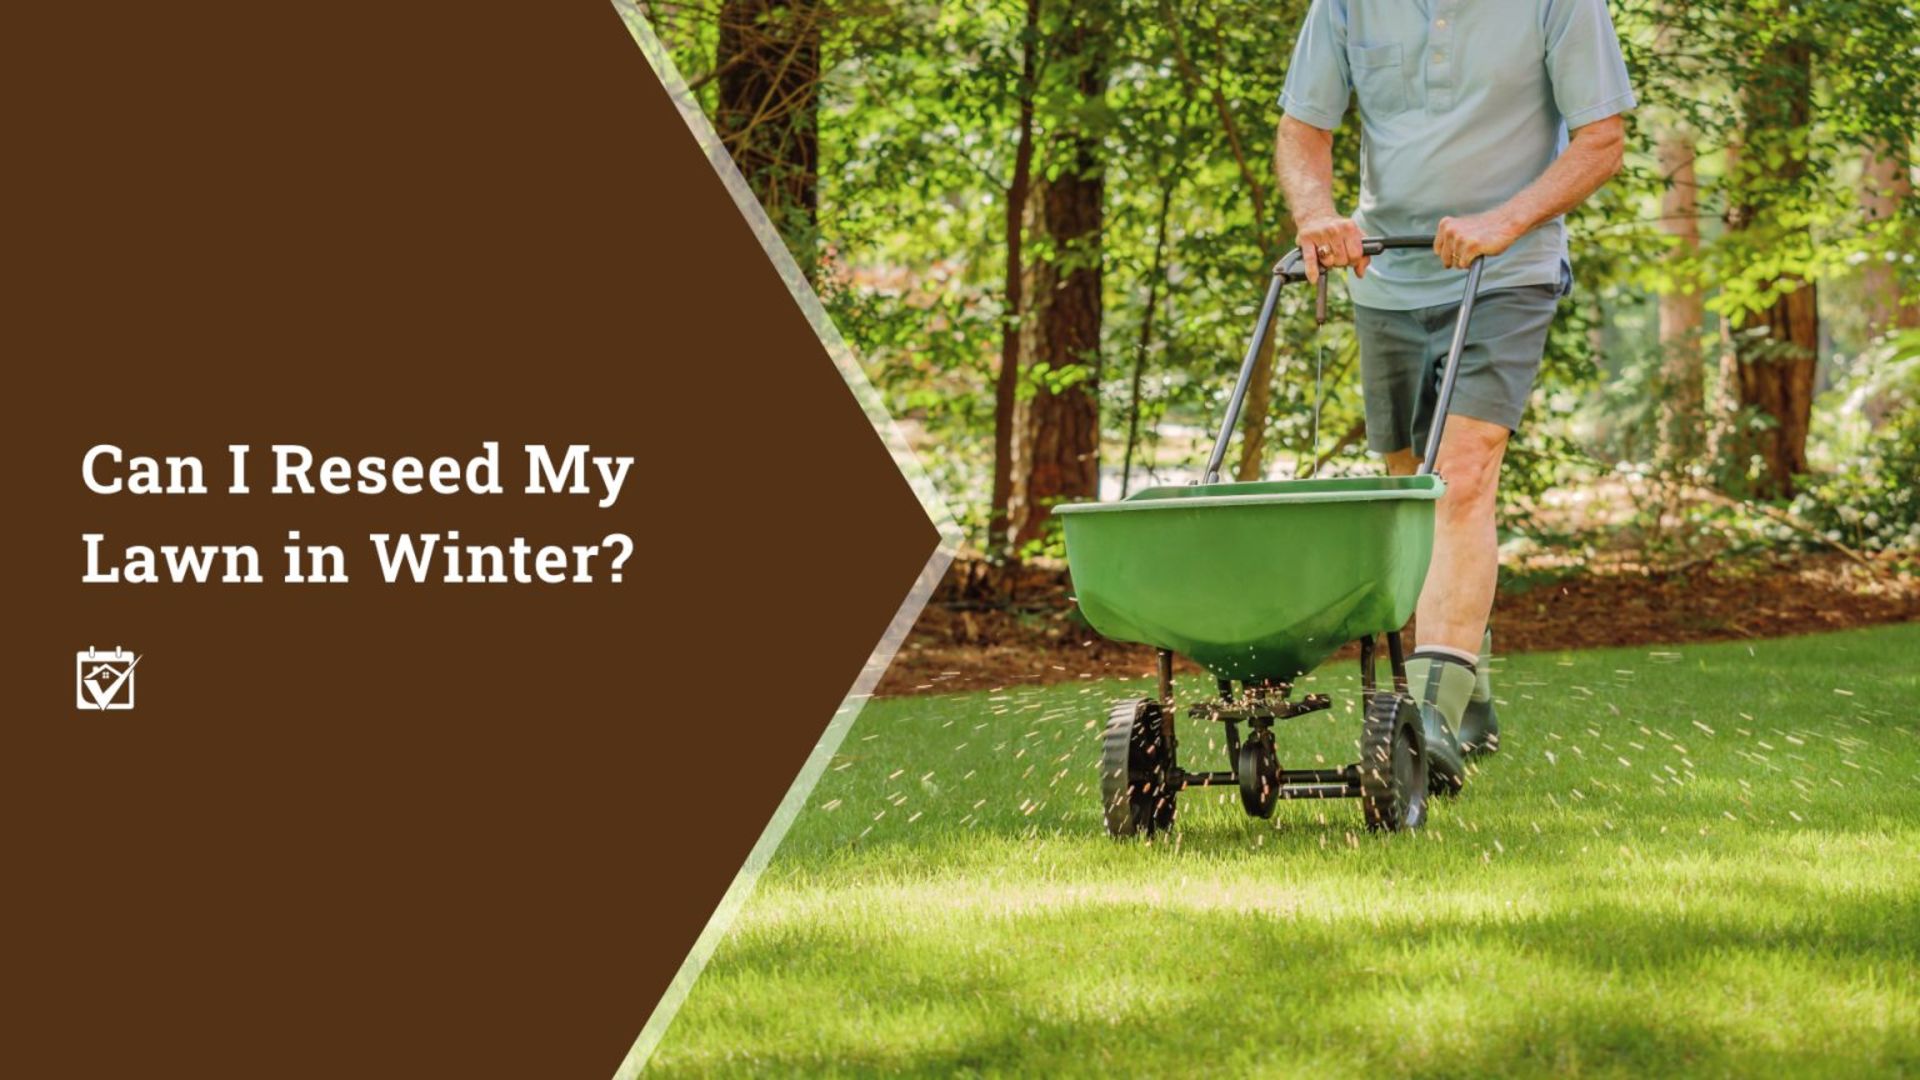 Can I Reseed My Lawn in Winter?